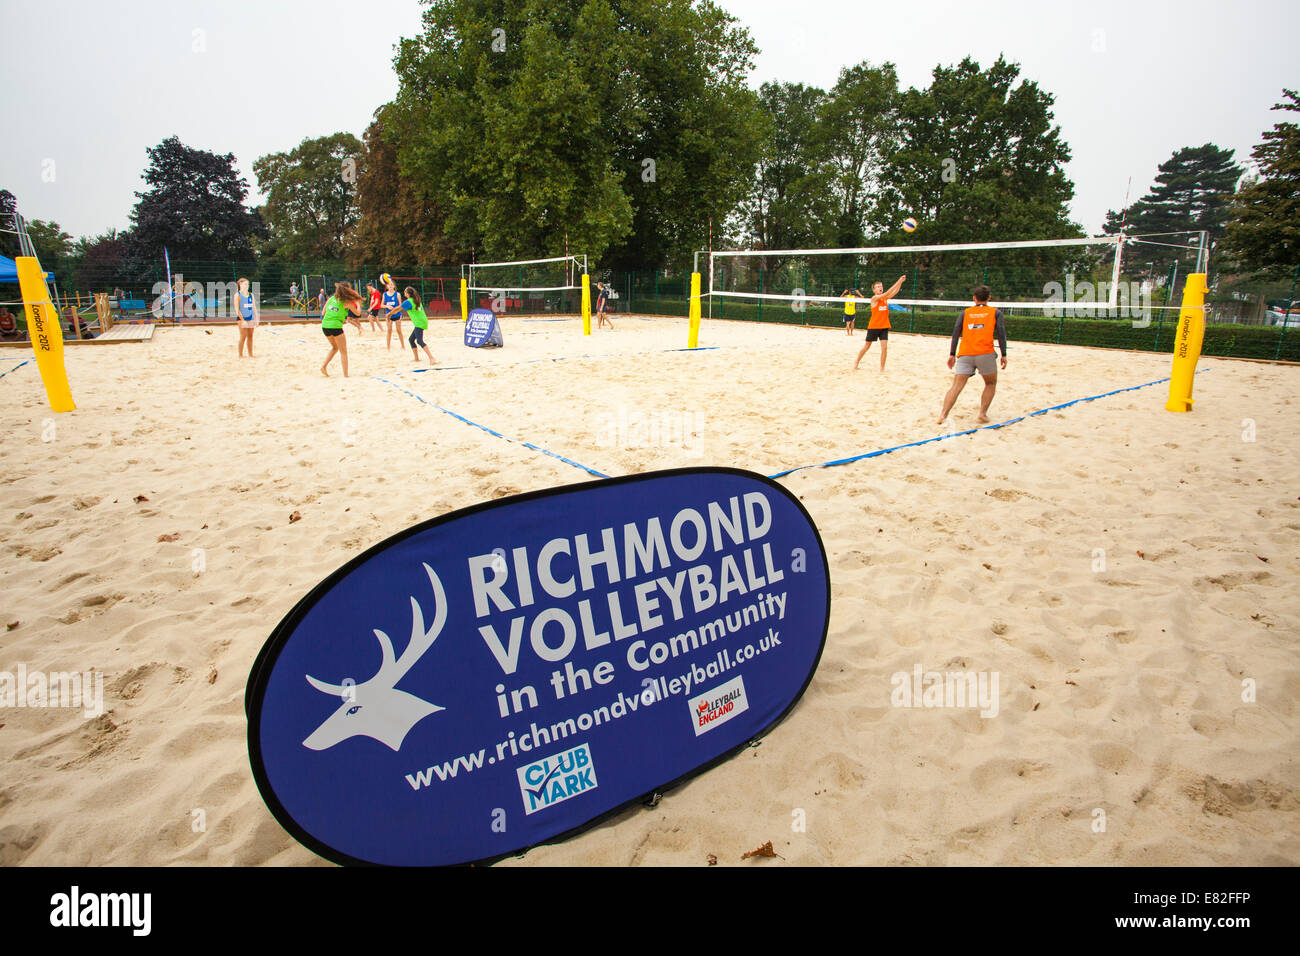 People playing on Richmond beach volleyball court. Stock Photo